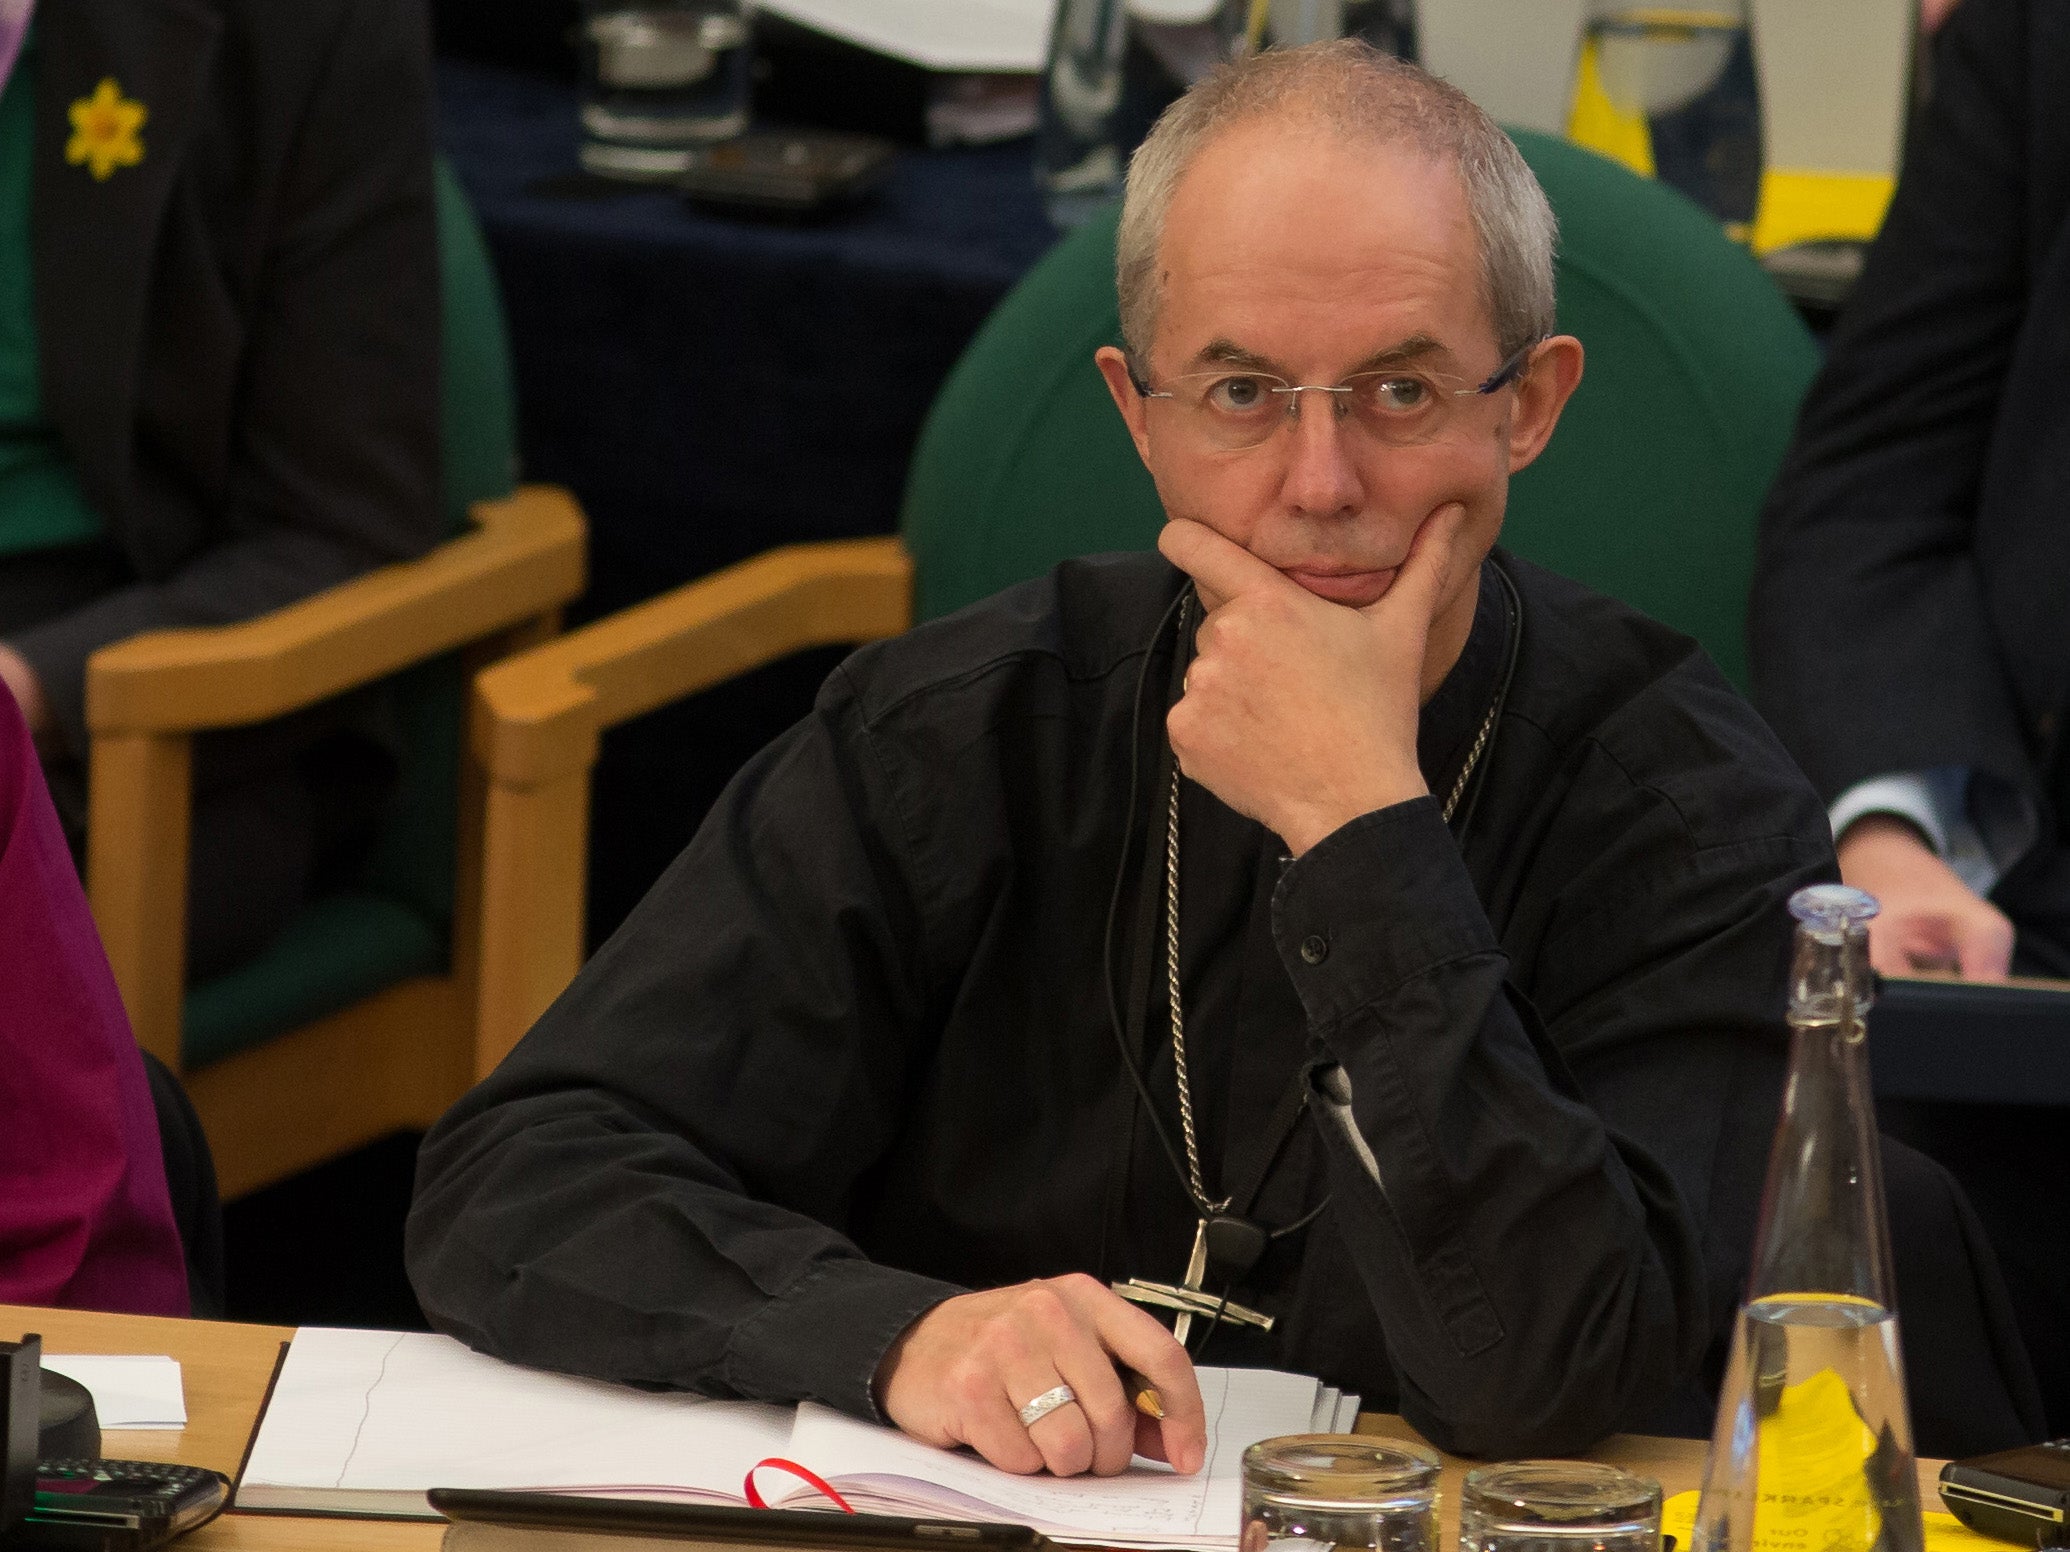 The Archbishop of Canterbury, Justin Welby, said the advice offers a 'celebration of our humanity without exception or exclusion'